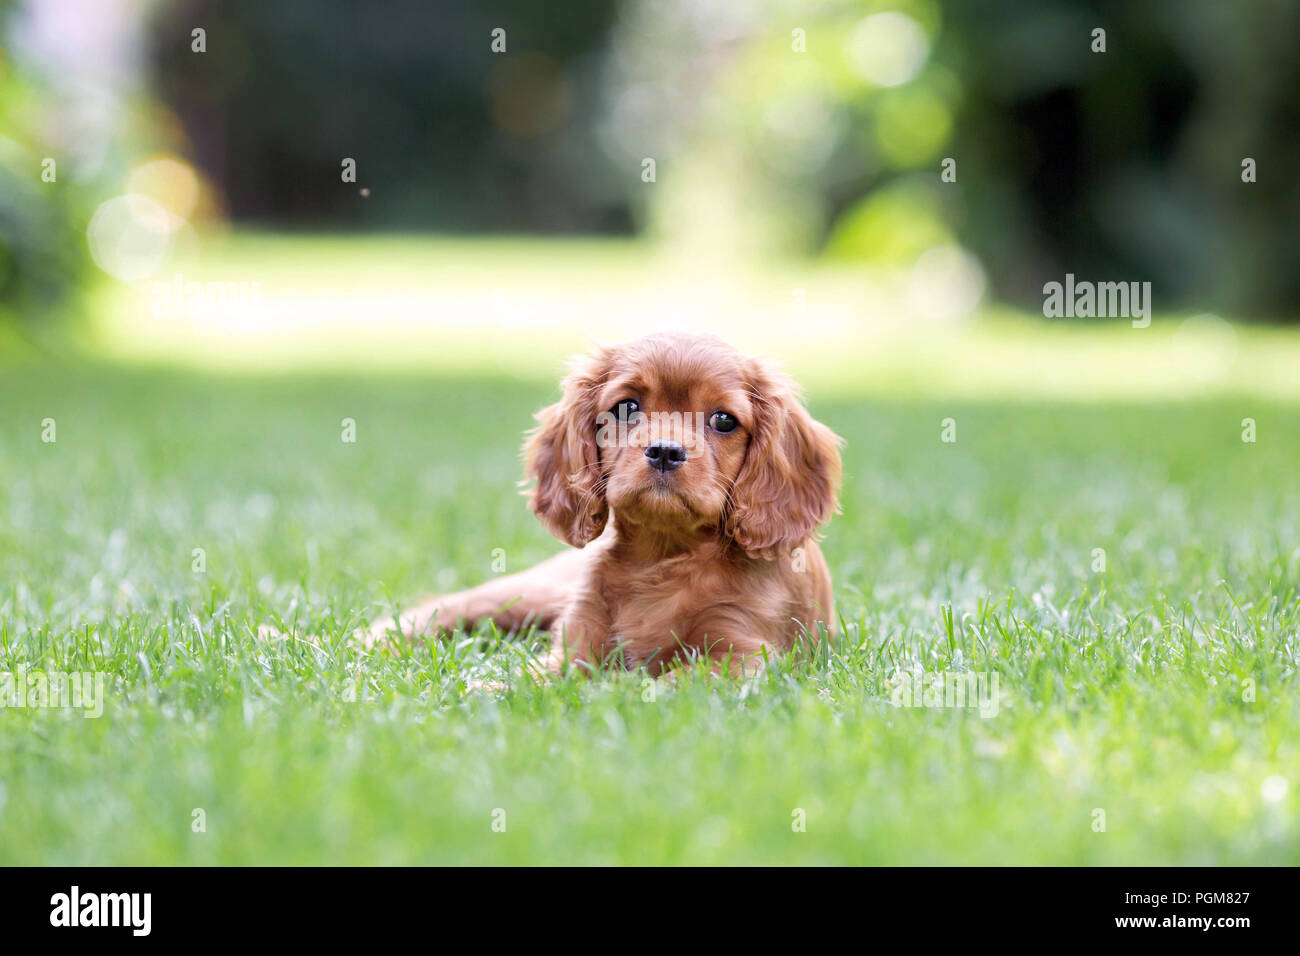 Cute puppy lying on the grass in the garden Stock Photo